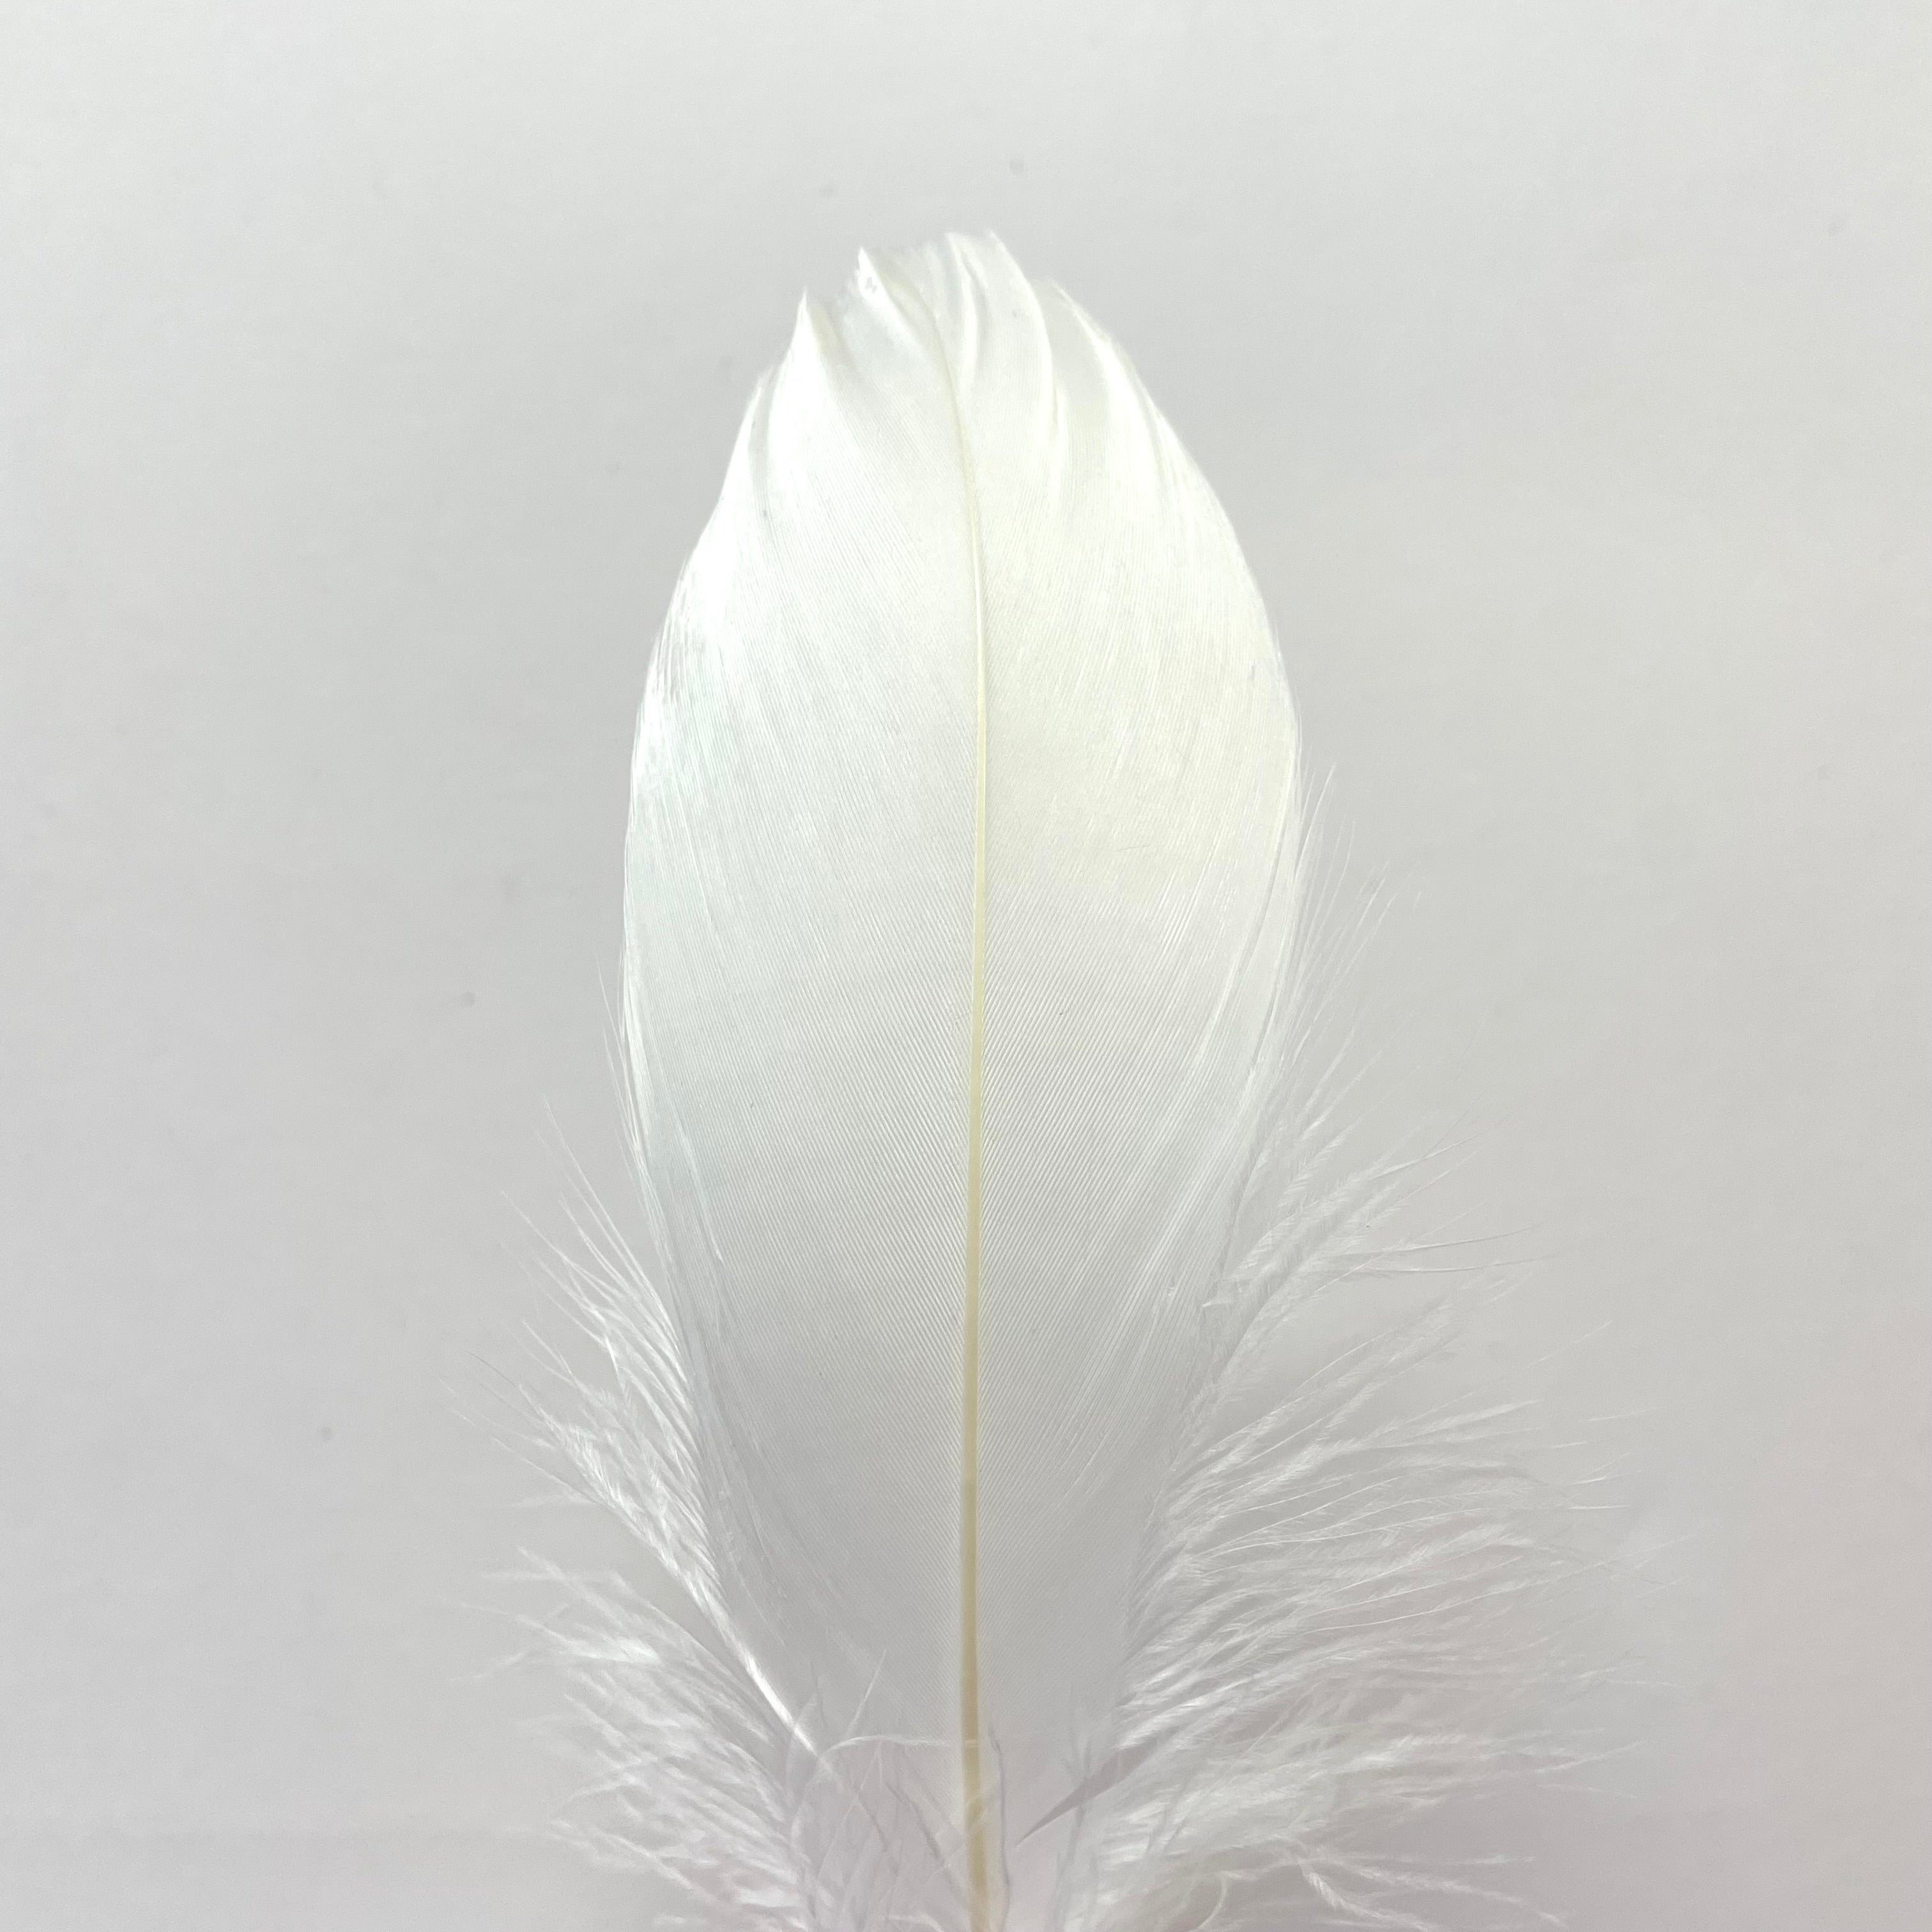 Goose Nagoire Feathers 10 grams - White